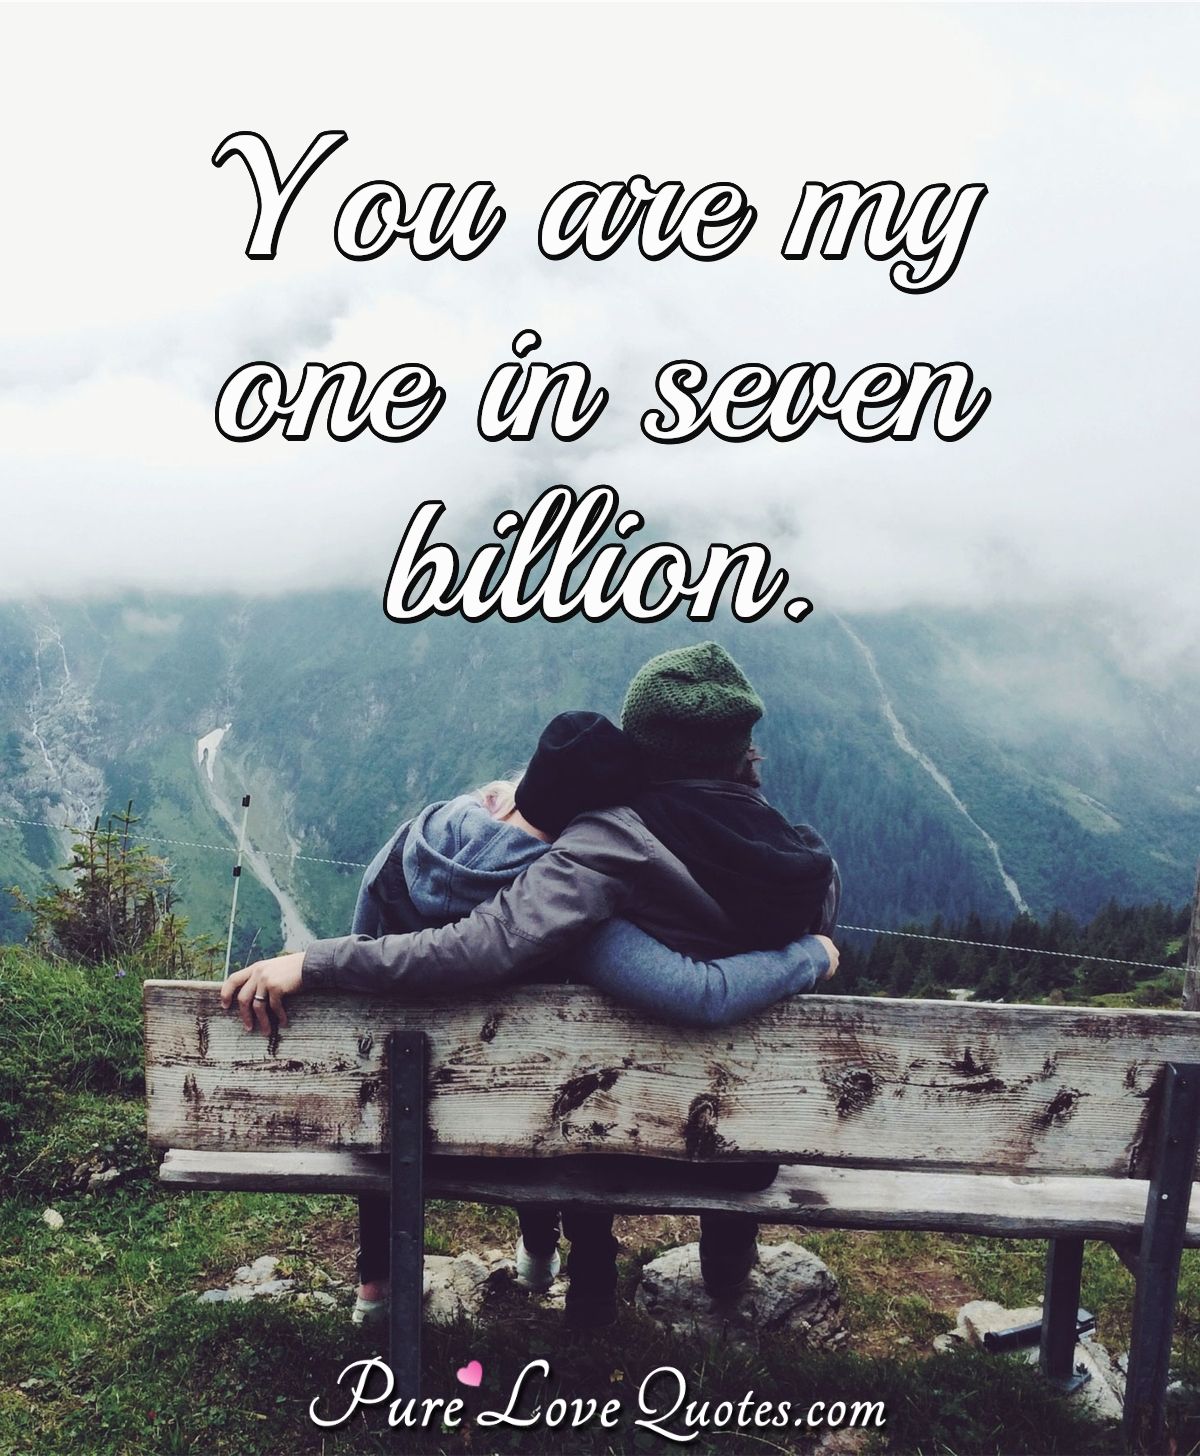 You are my one in seven billion. - Anonymous